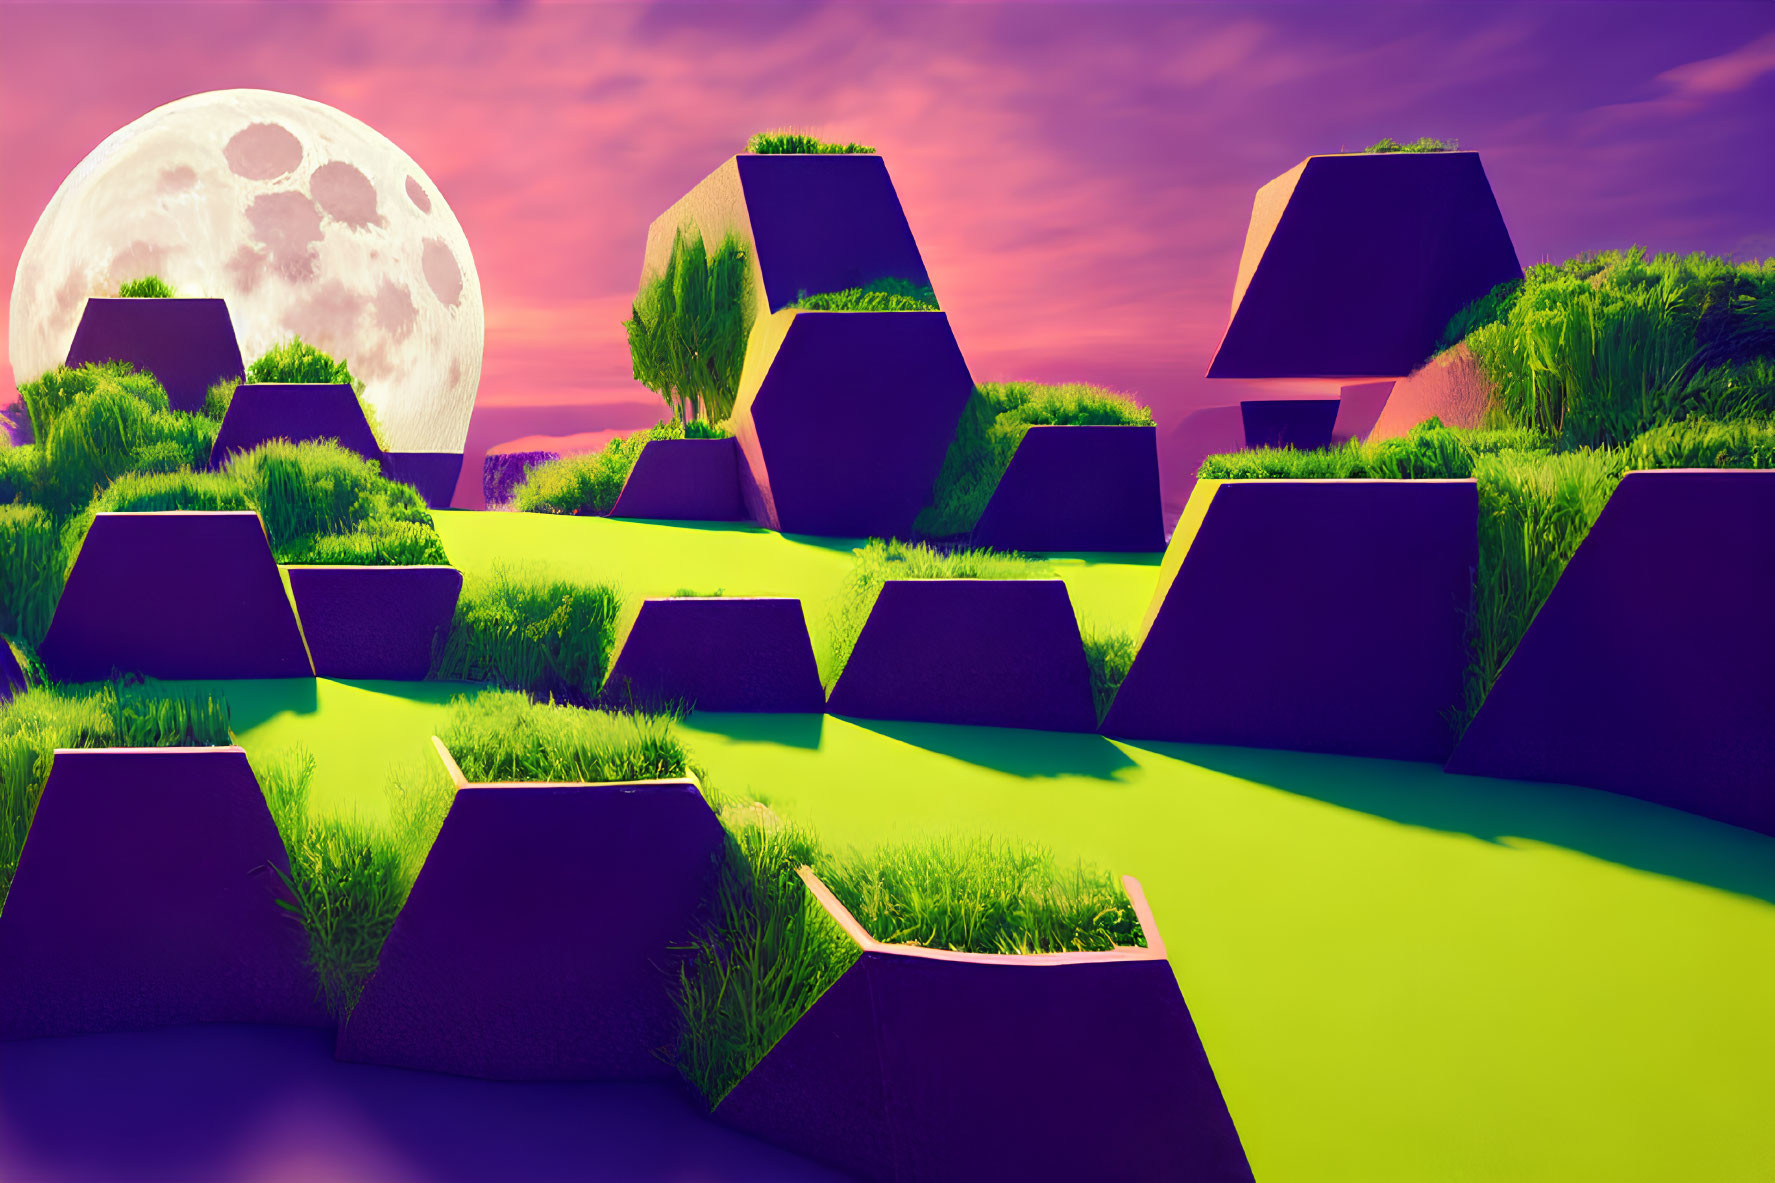 Surreal landscape with geometric shapes, grass, purple sky, and large moon